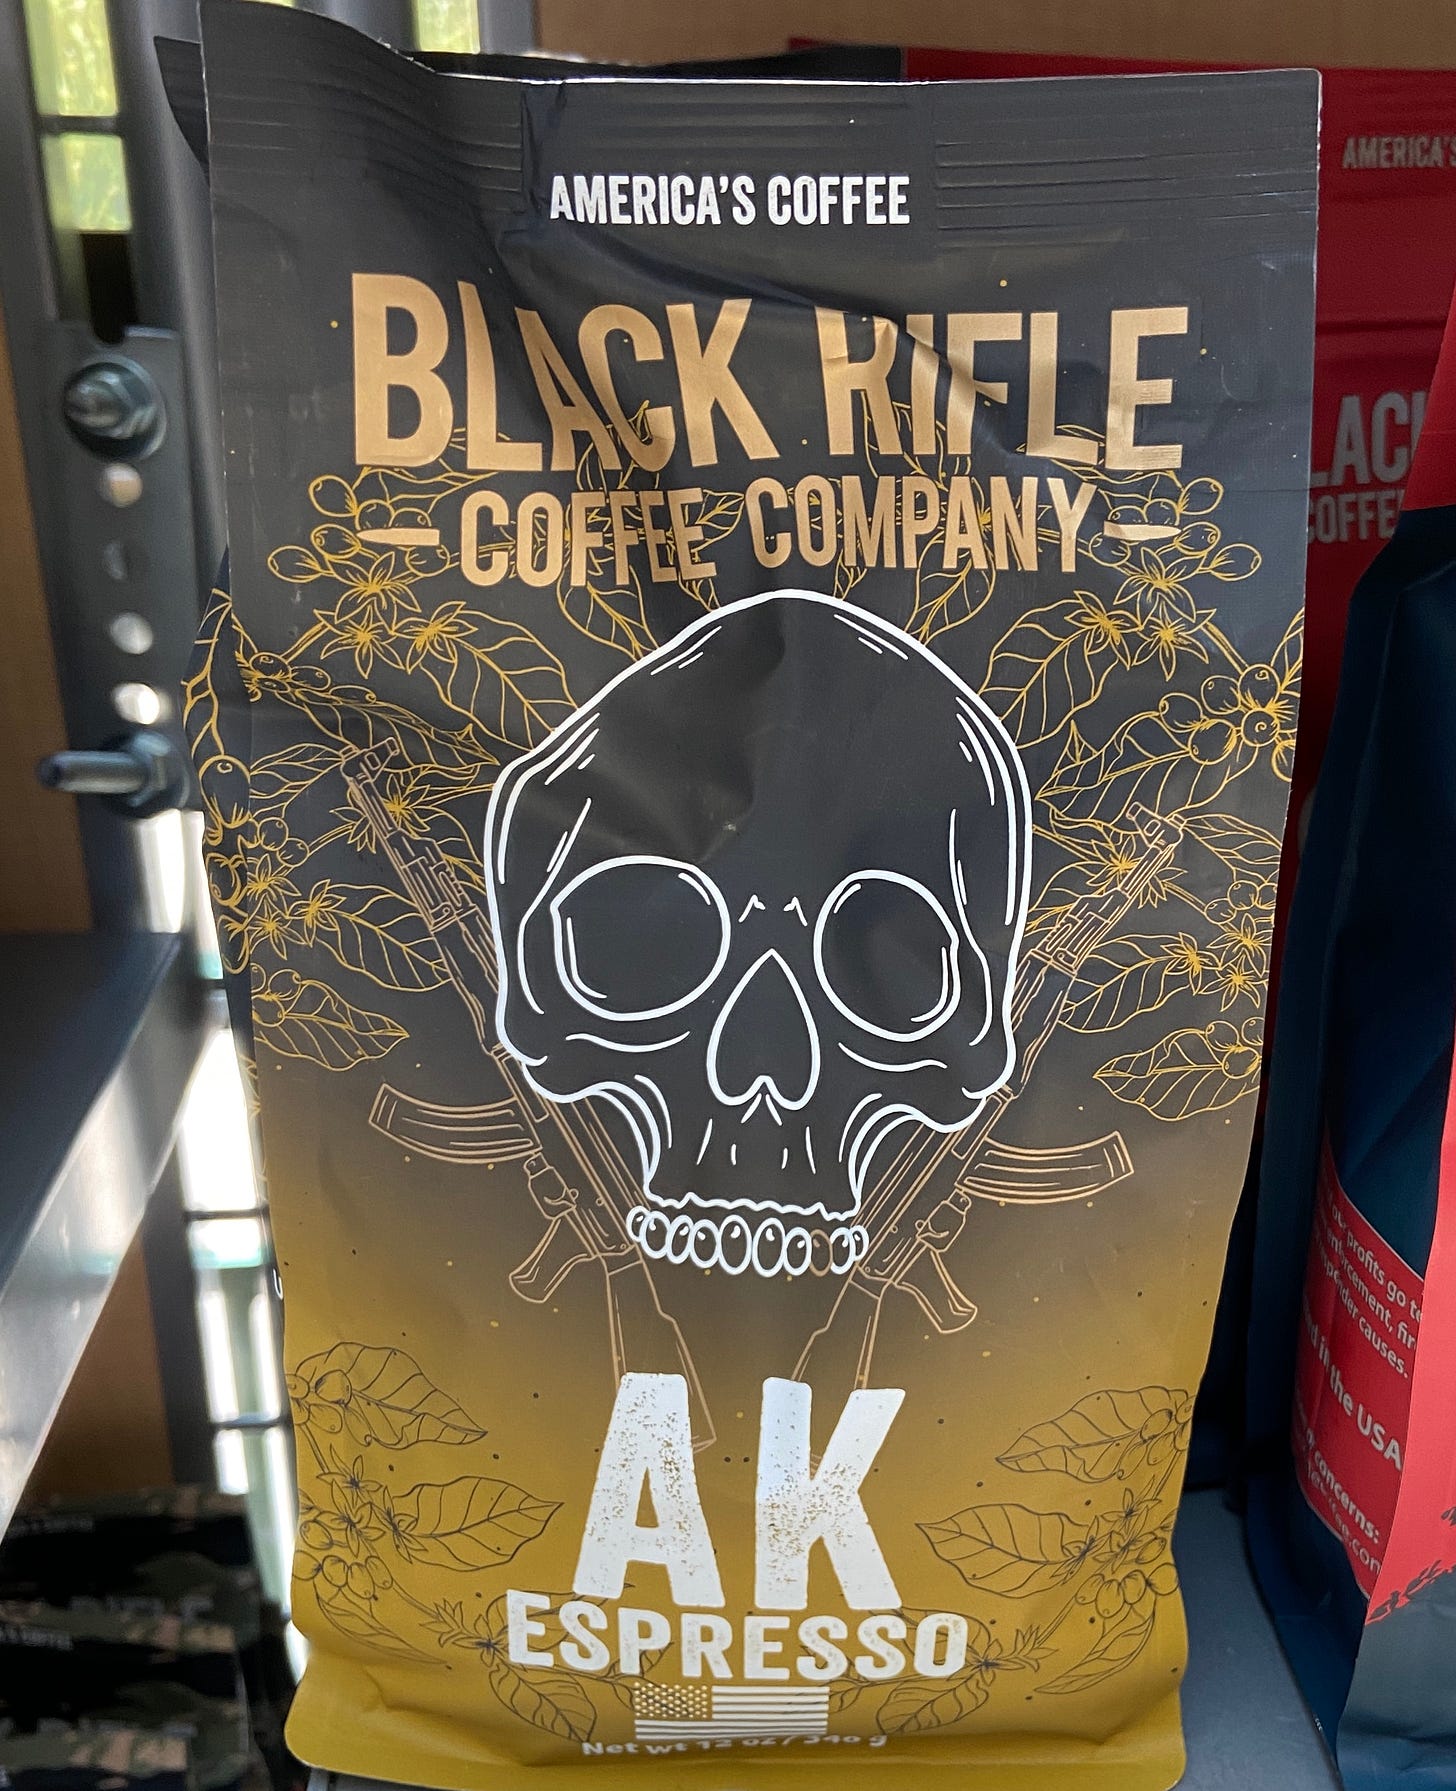 A coffee bag with a skull and AK-47 assault rifles, with the title "AK Espresso"